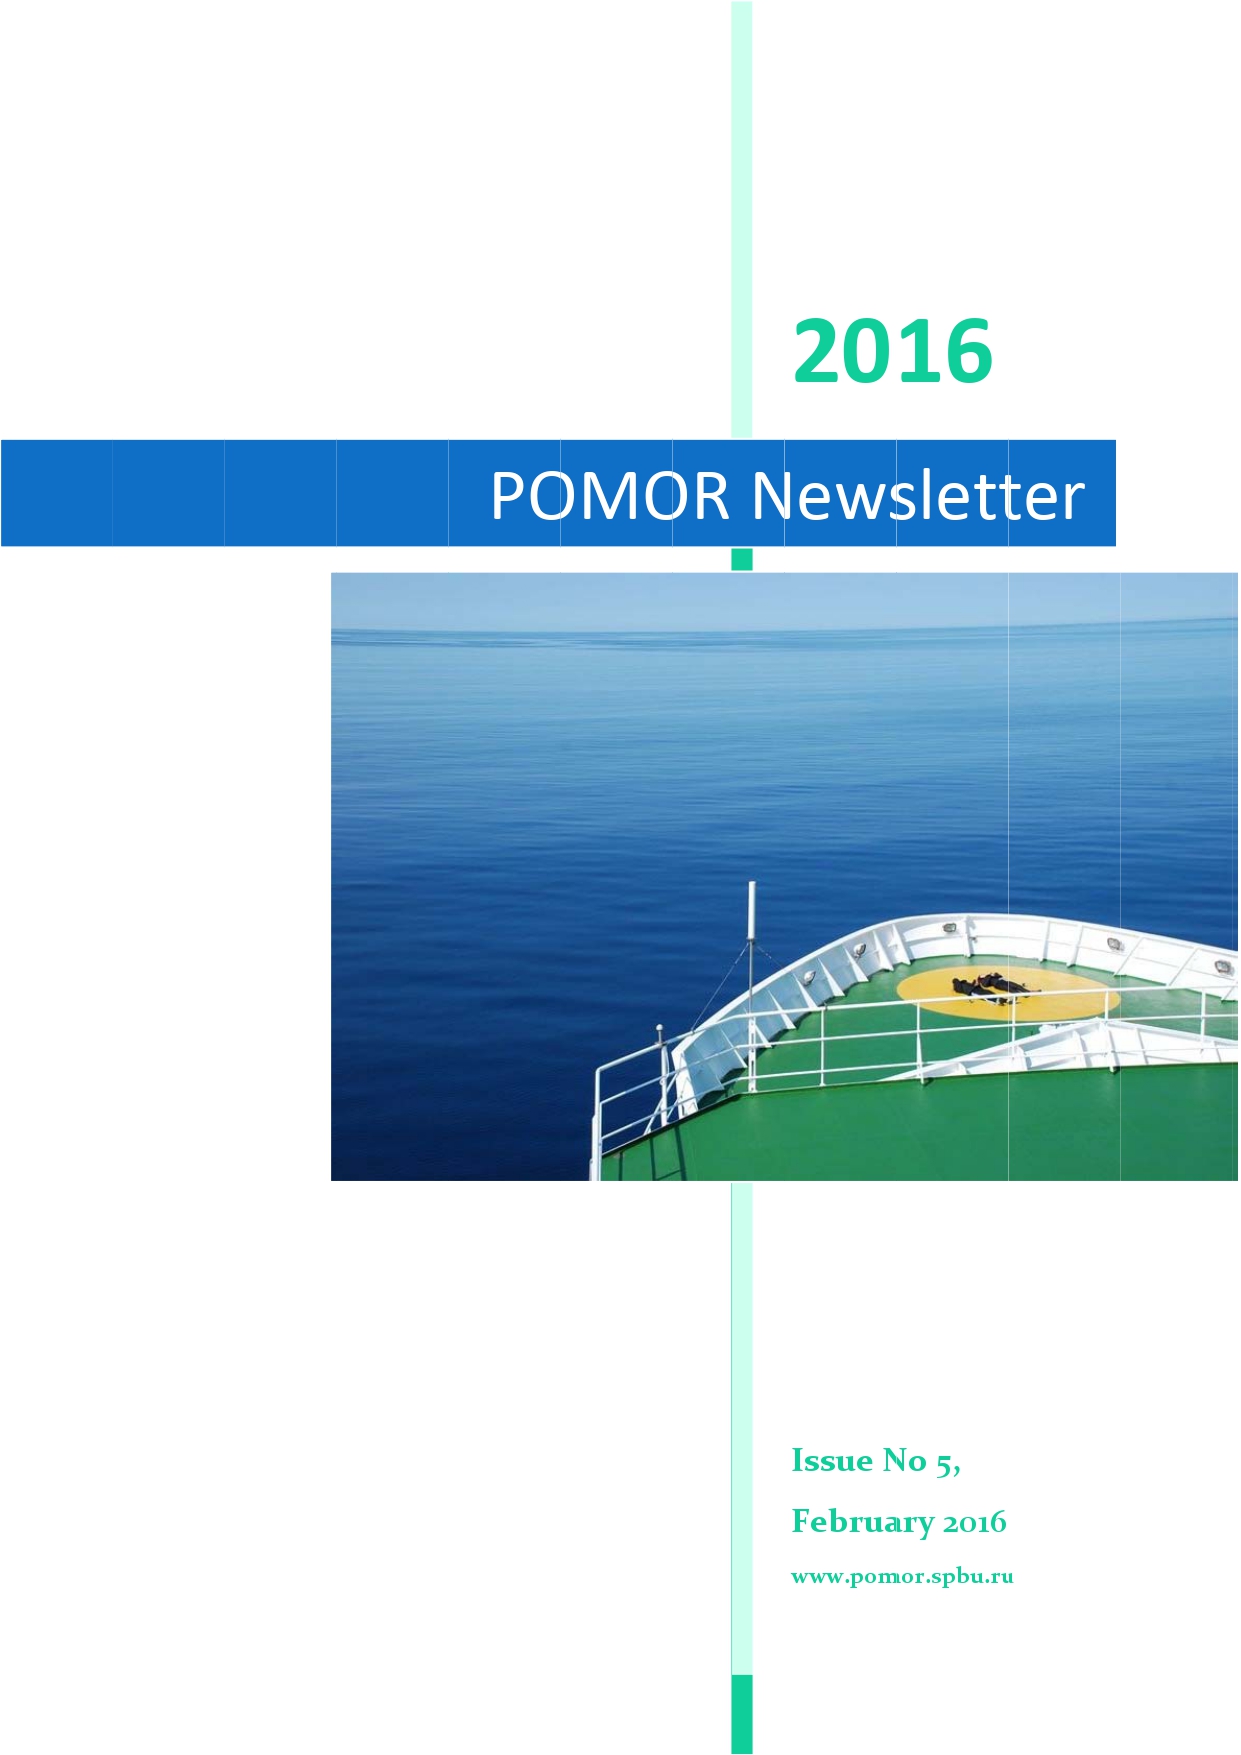 POMOR Newsletter issue5a 1 page 0001